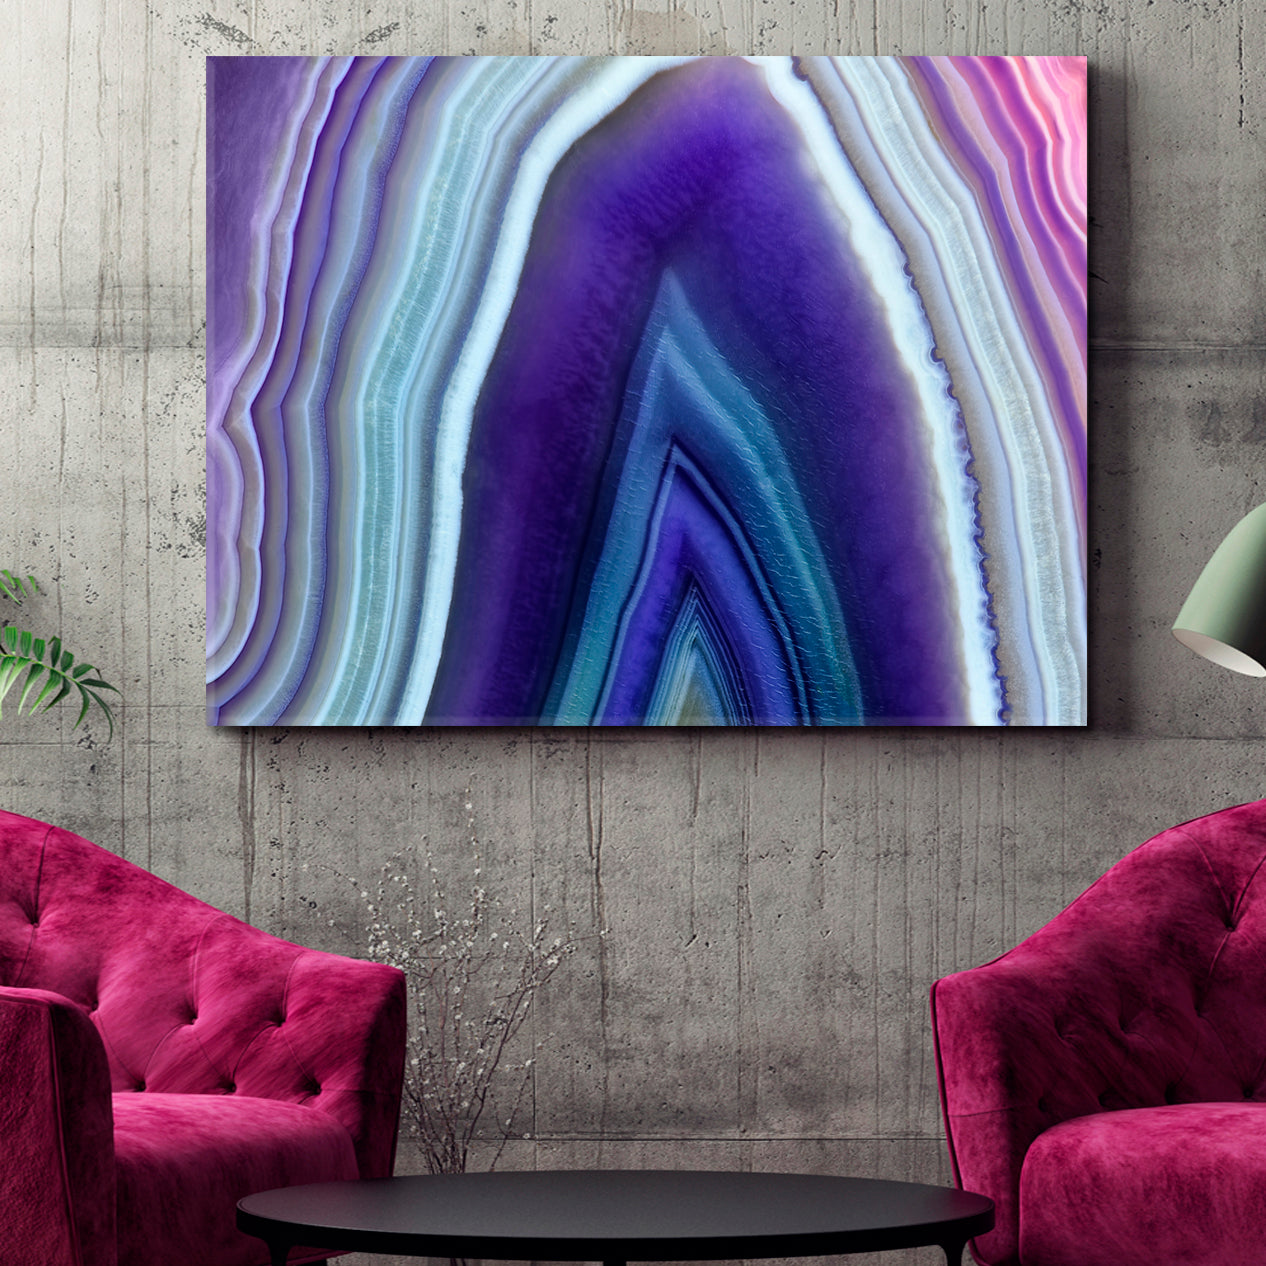 Amazing Violet Agate Crystal Cross Section Purple Abstract Structure Abstract Art Print Artesty 1 panel 24" x 16" 